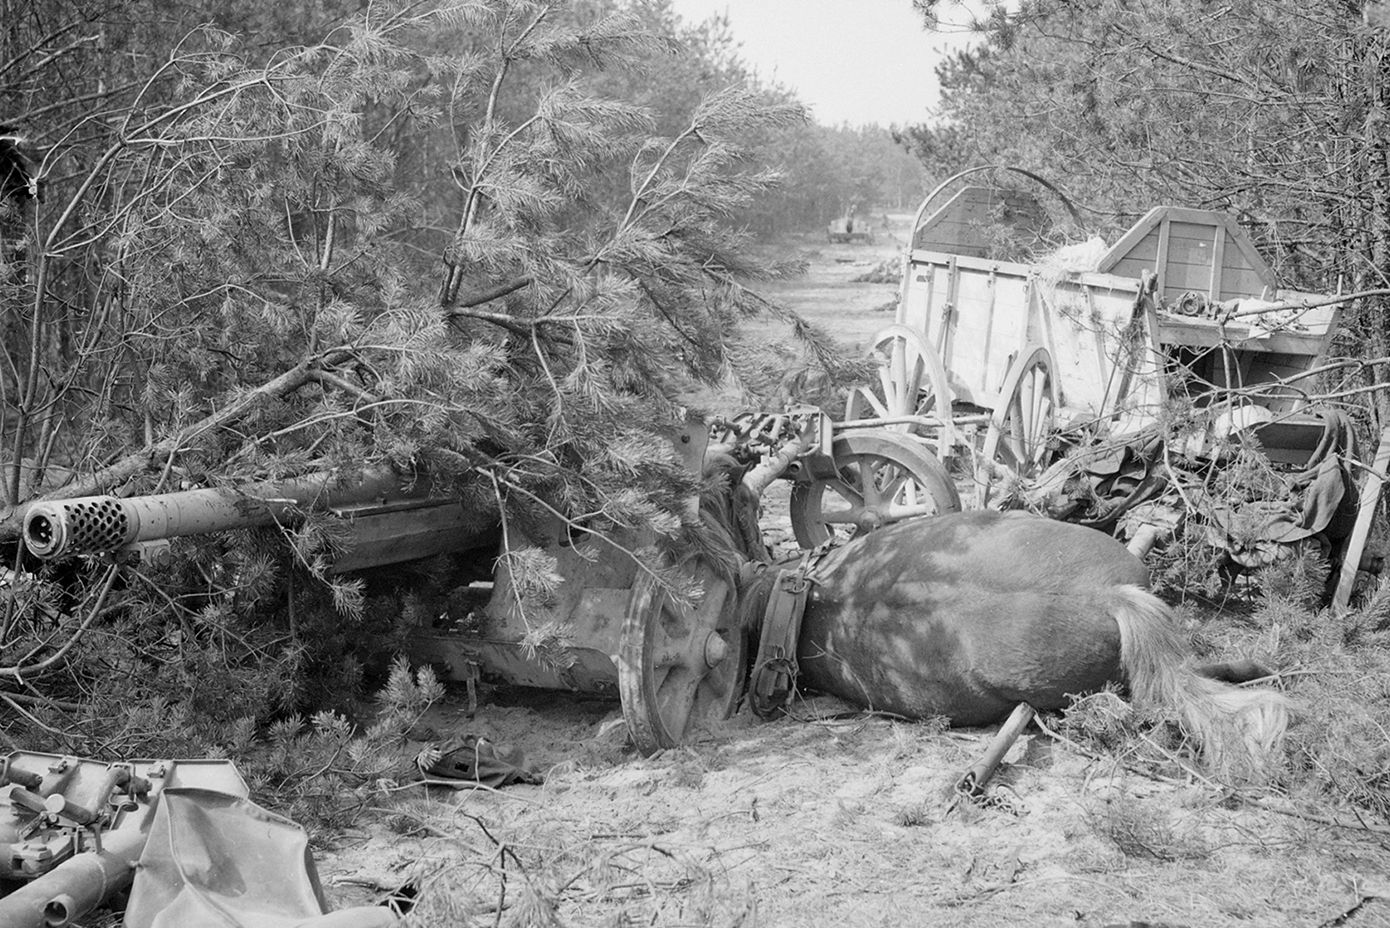 Wrecked German equipment and a dead horse near Otterloo on April 17